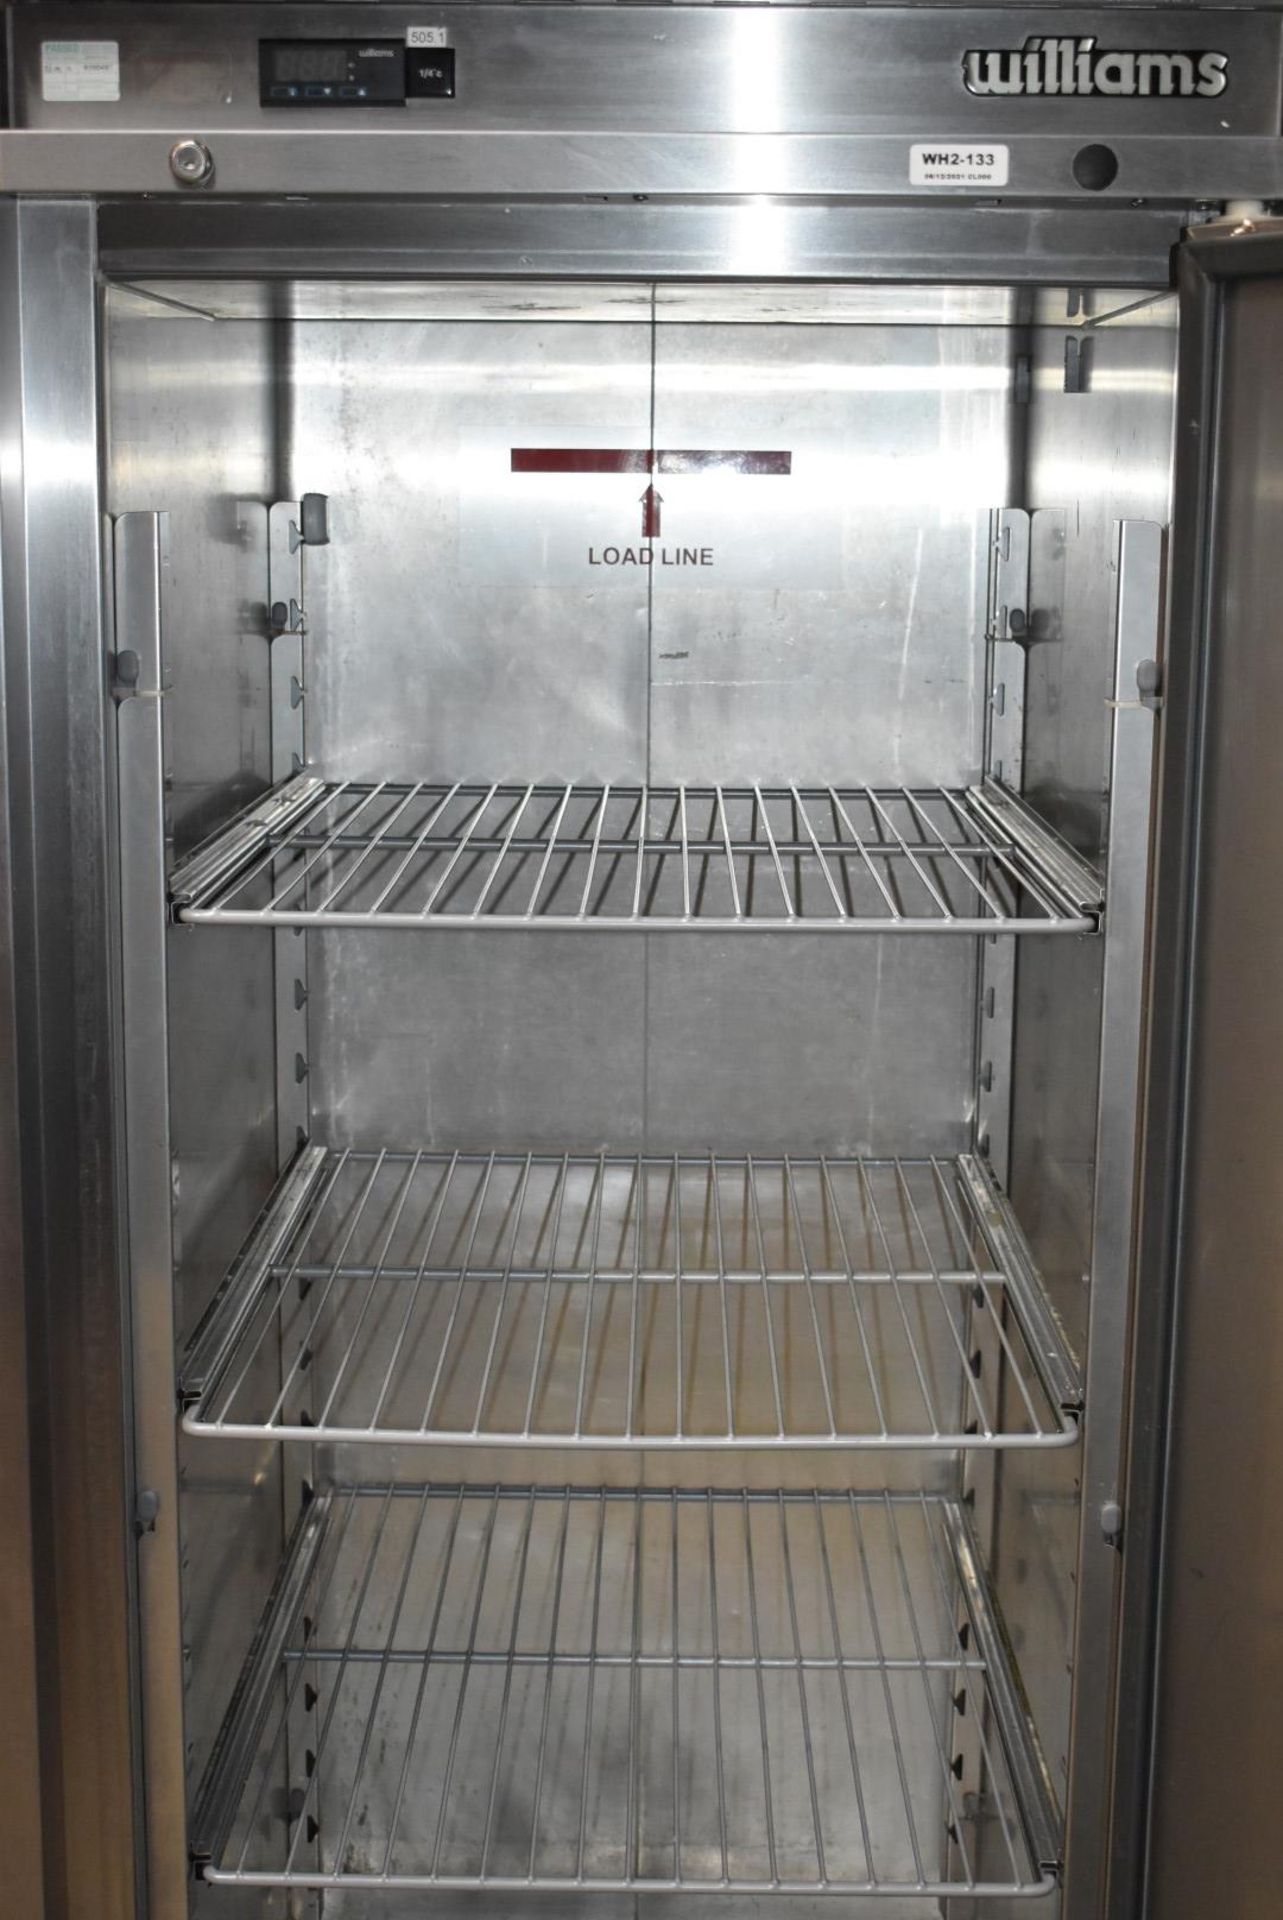 1 x Williams Upright Single Door Refrigerator With Stainless Steel Exterior - Model HJ1SA - Recently - Image 9 of 11